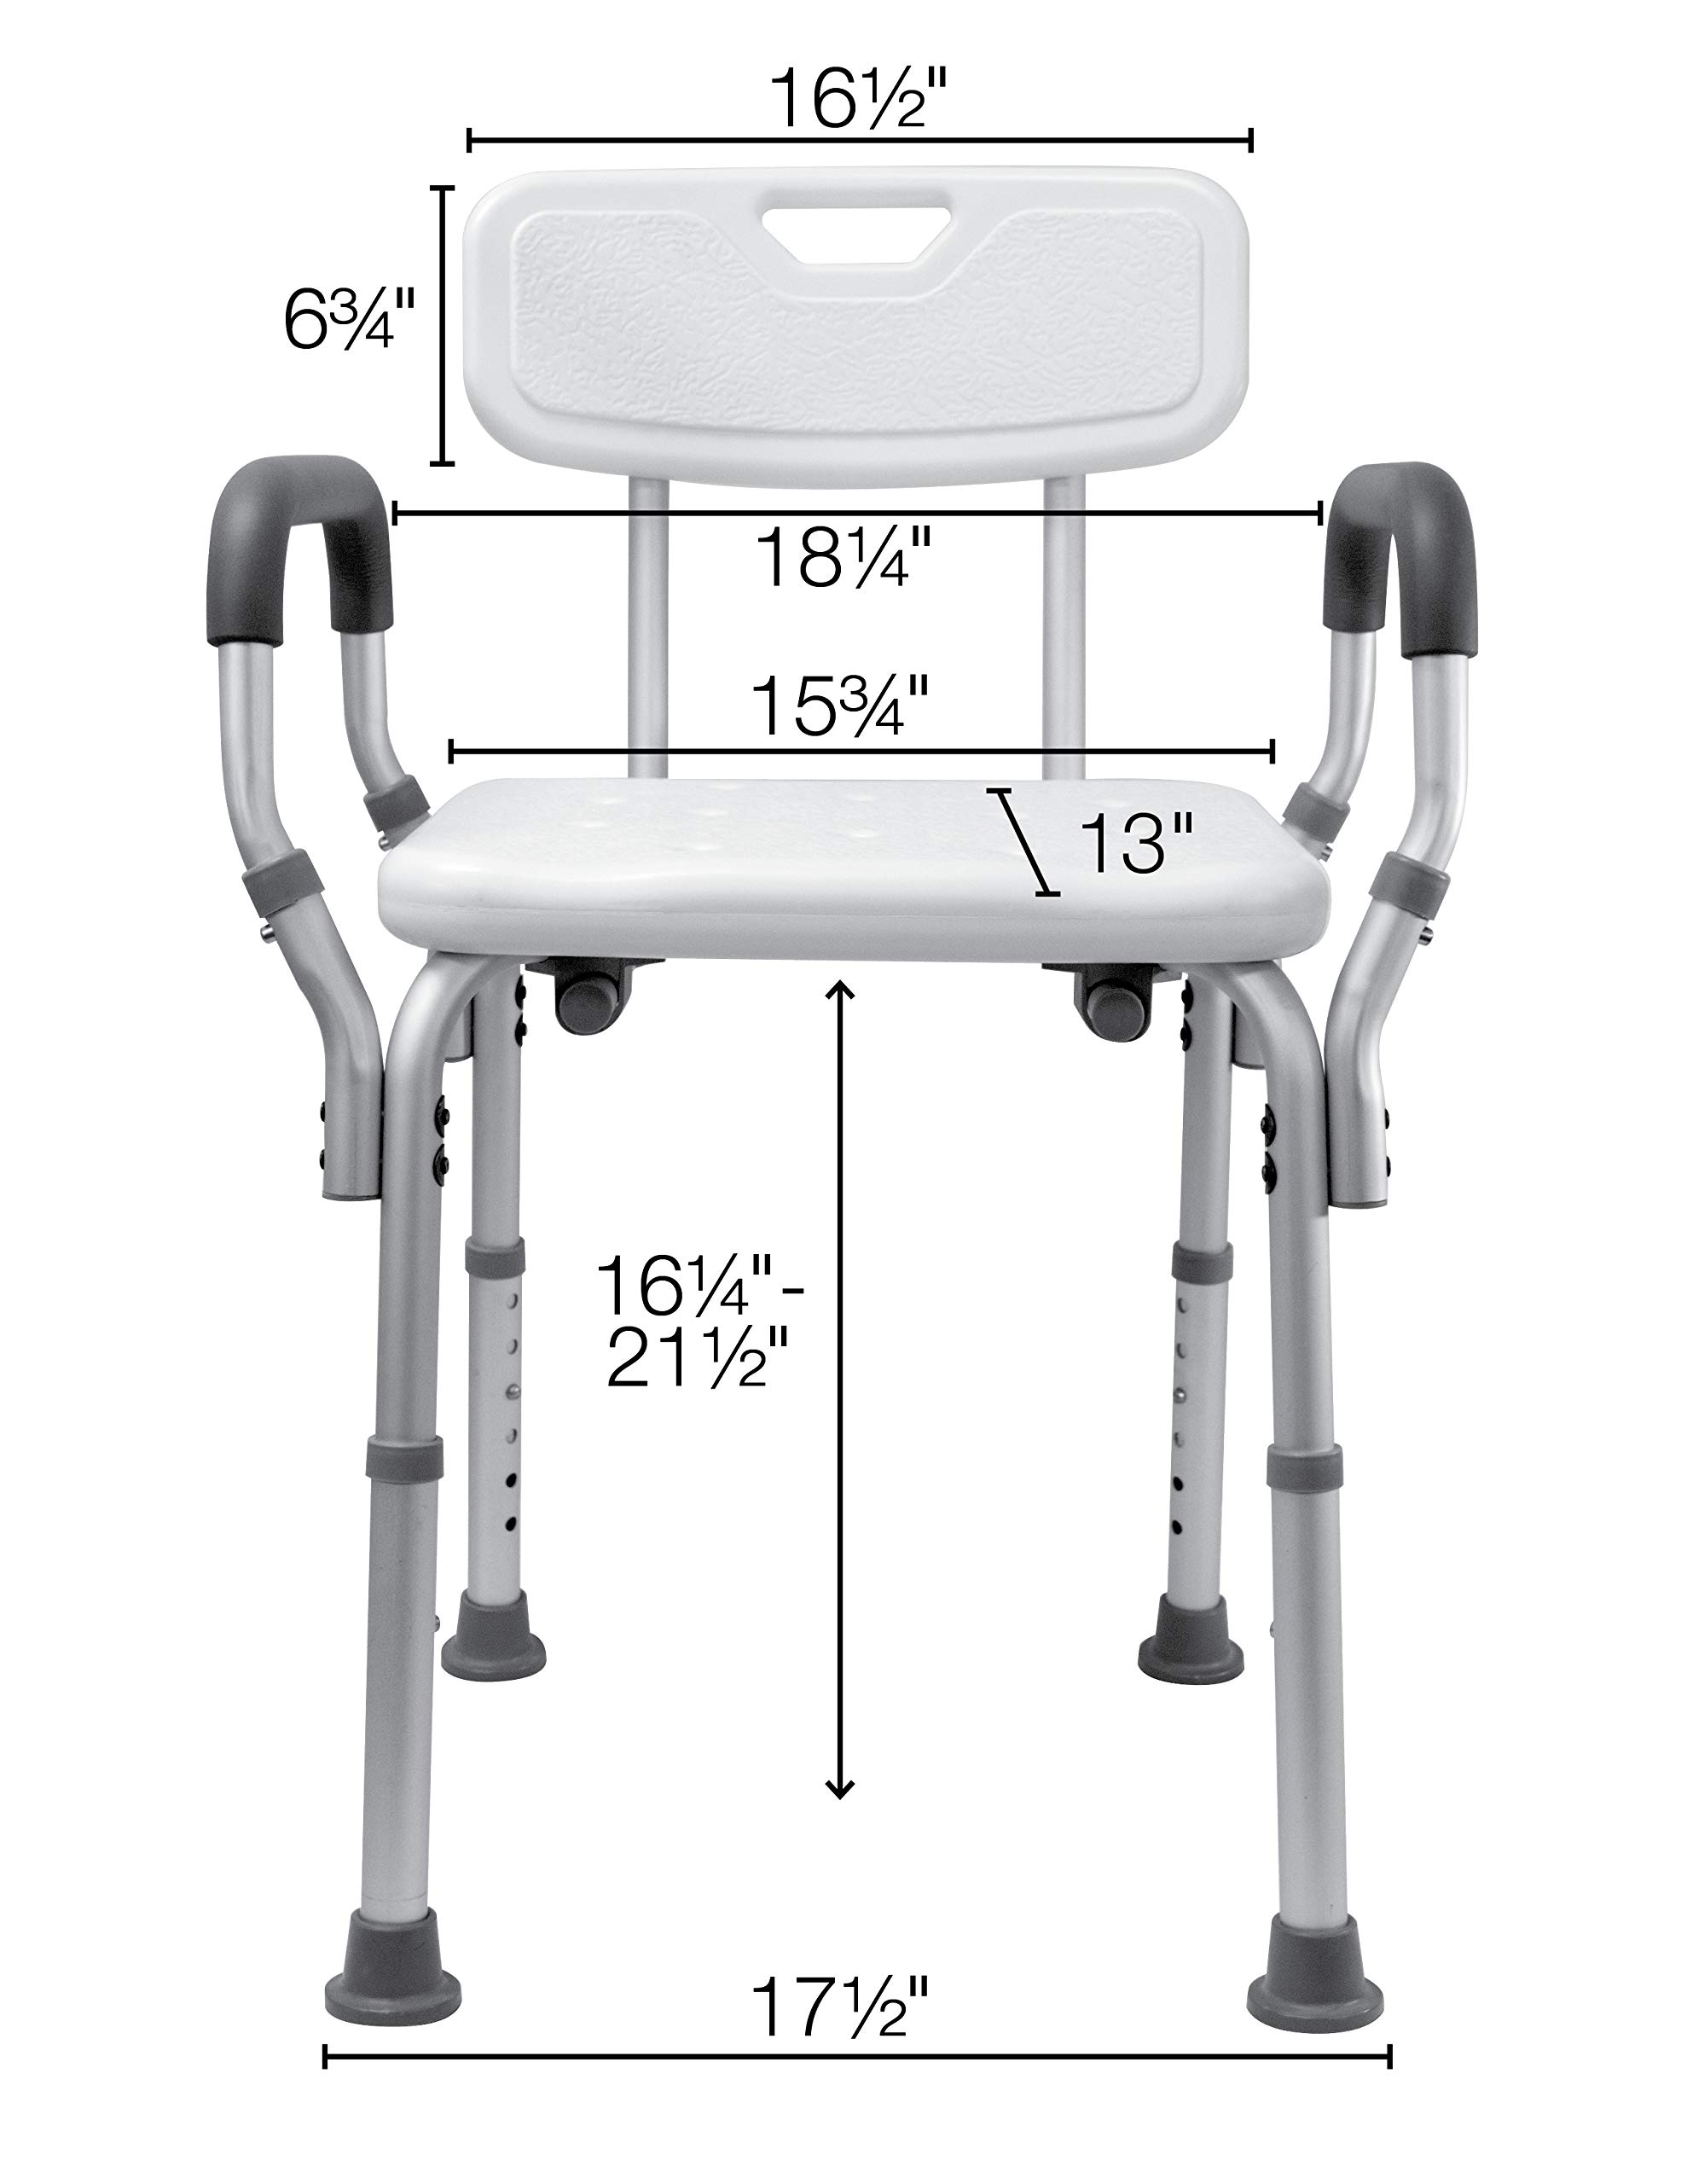 Essential Medical Supply Height Adjustable Shower and Bath Bench with Padded Arms, Contoured Back and Textured Shower Chair Seat